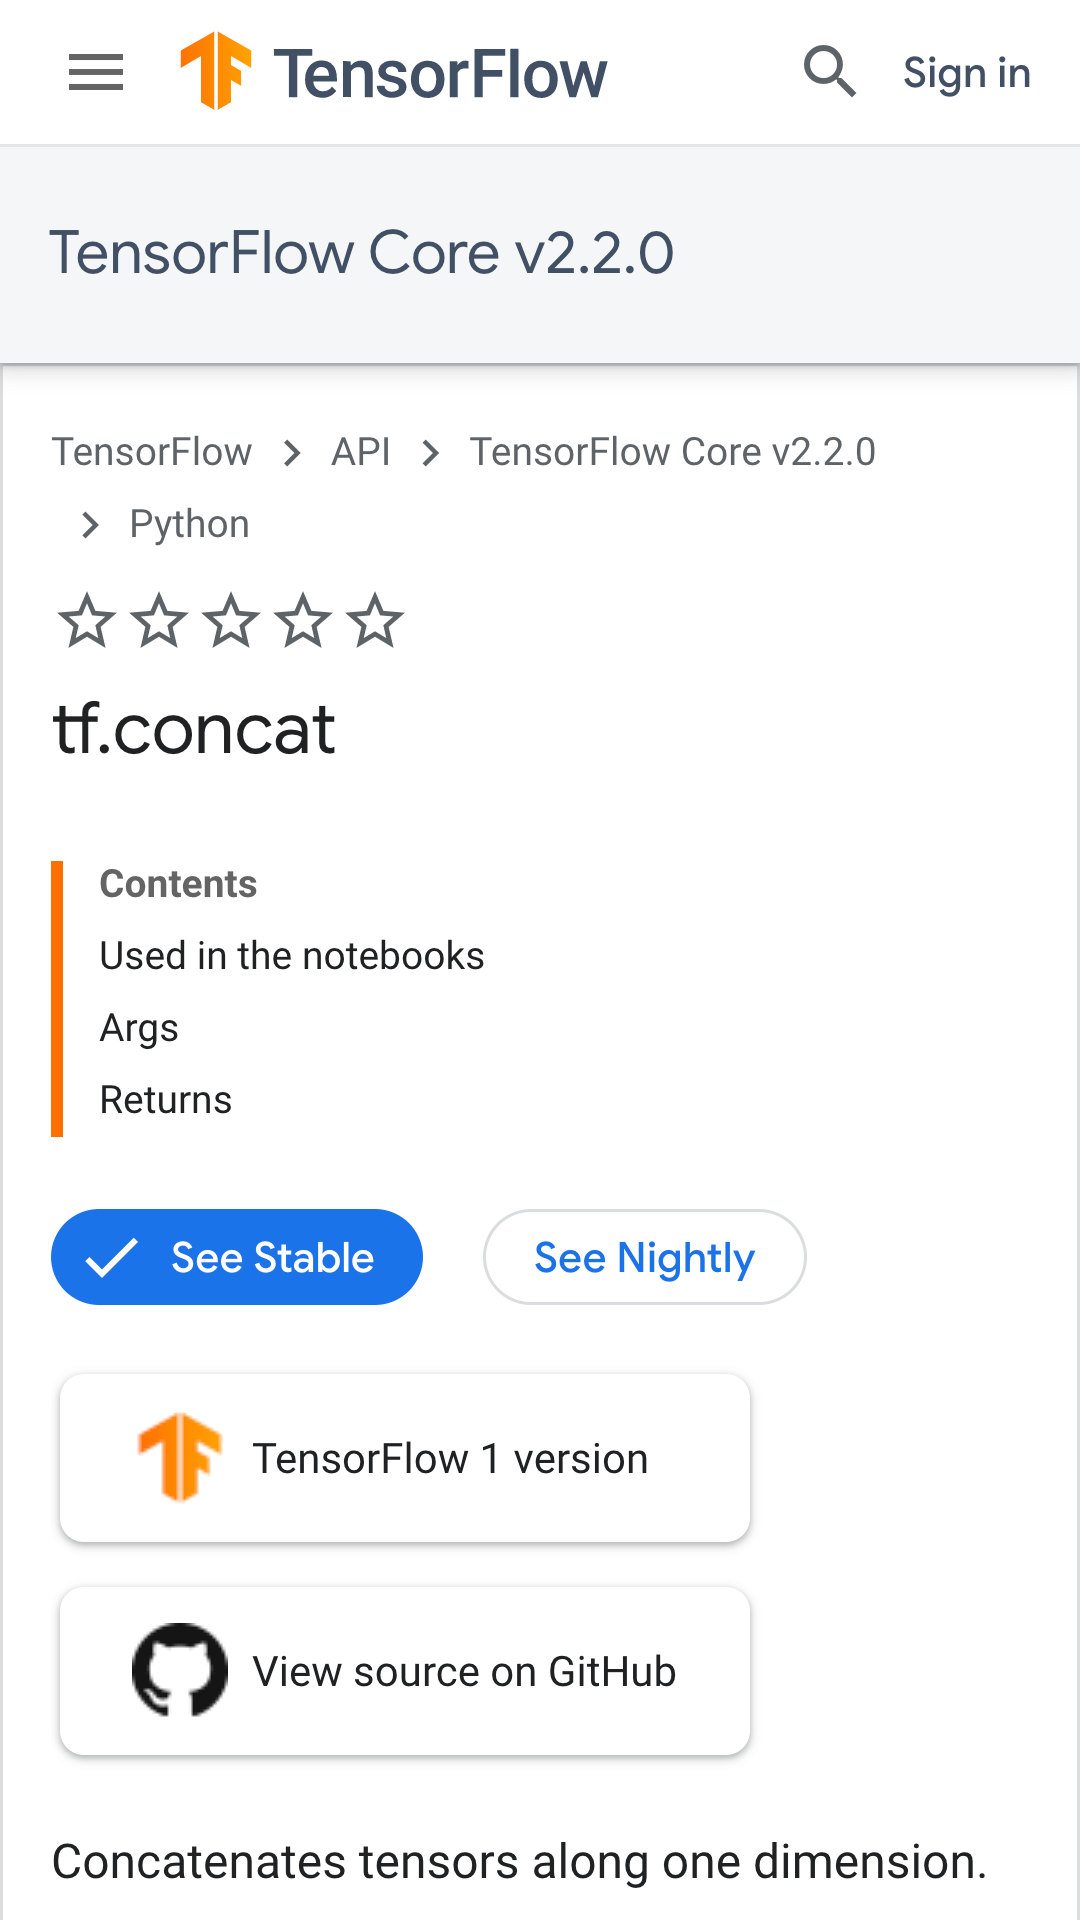 Tensorflow API docs for tf.concat method, mobile UI. The API docs are versioned, and there is a survey for rating the docs 1-5 stars